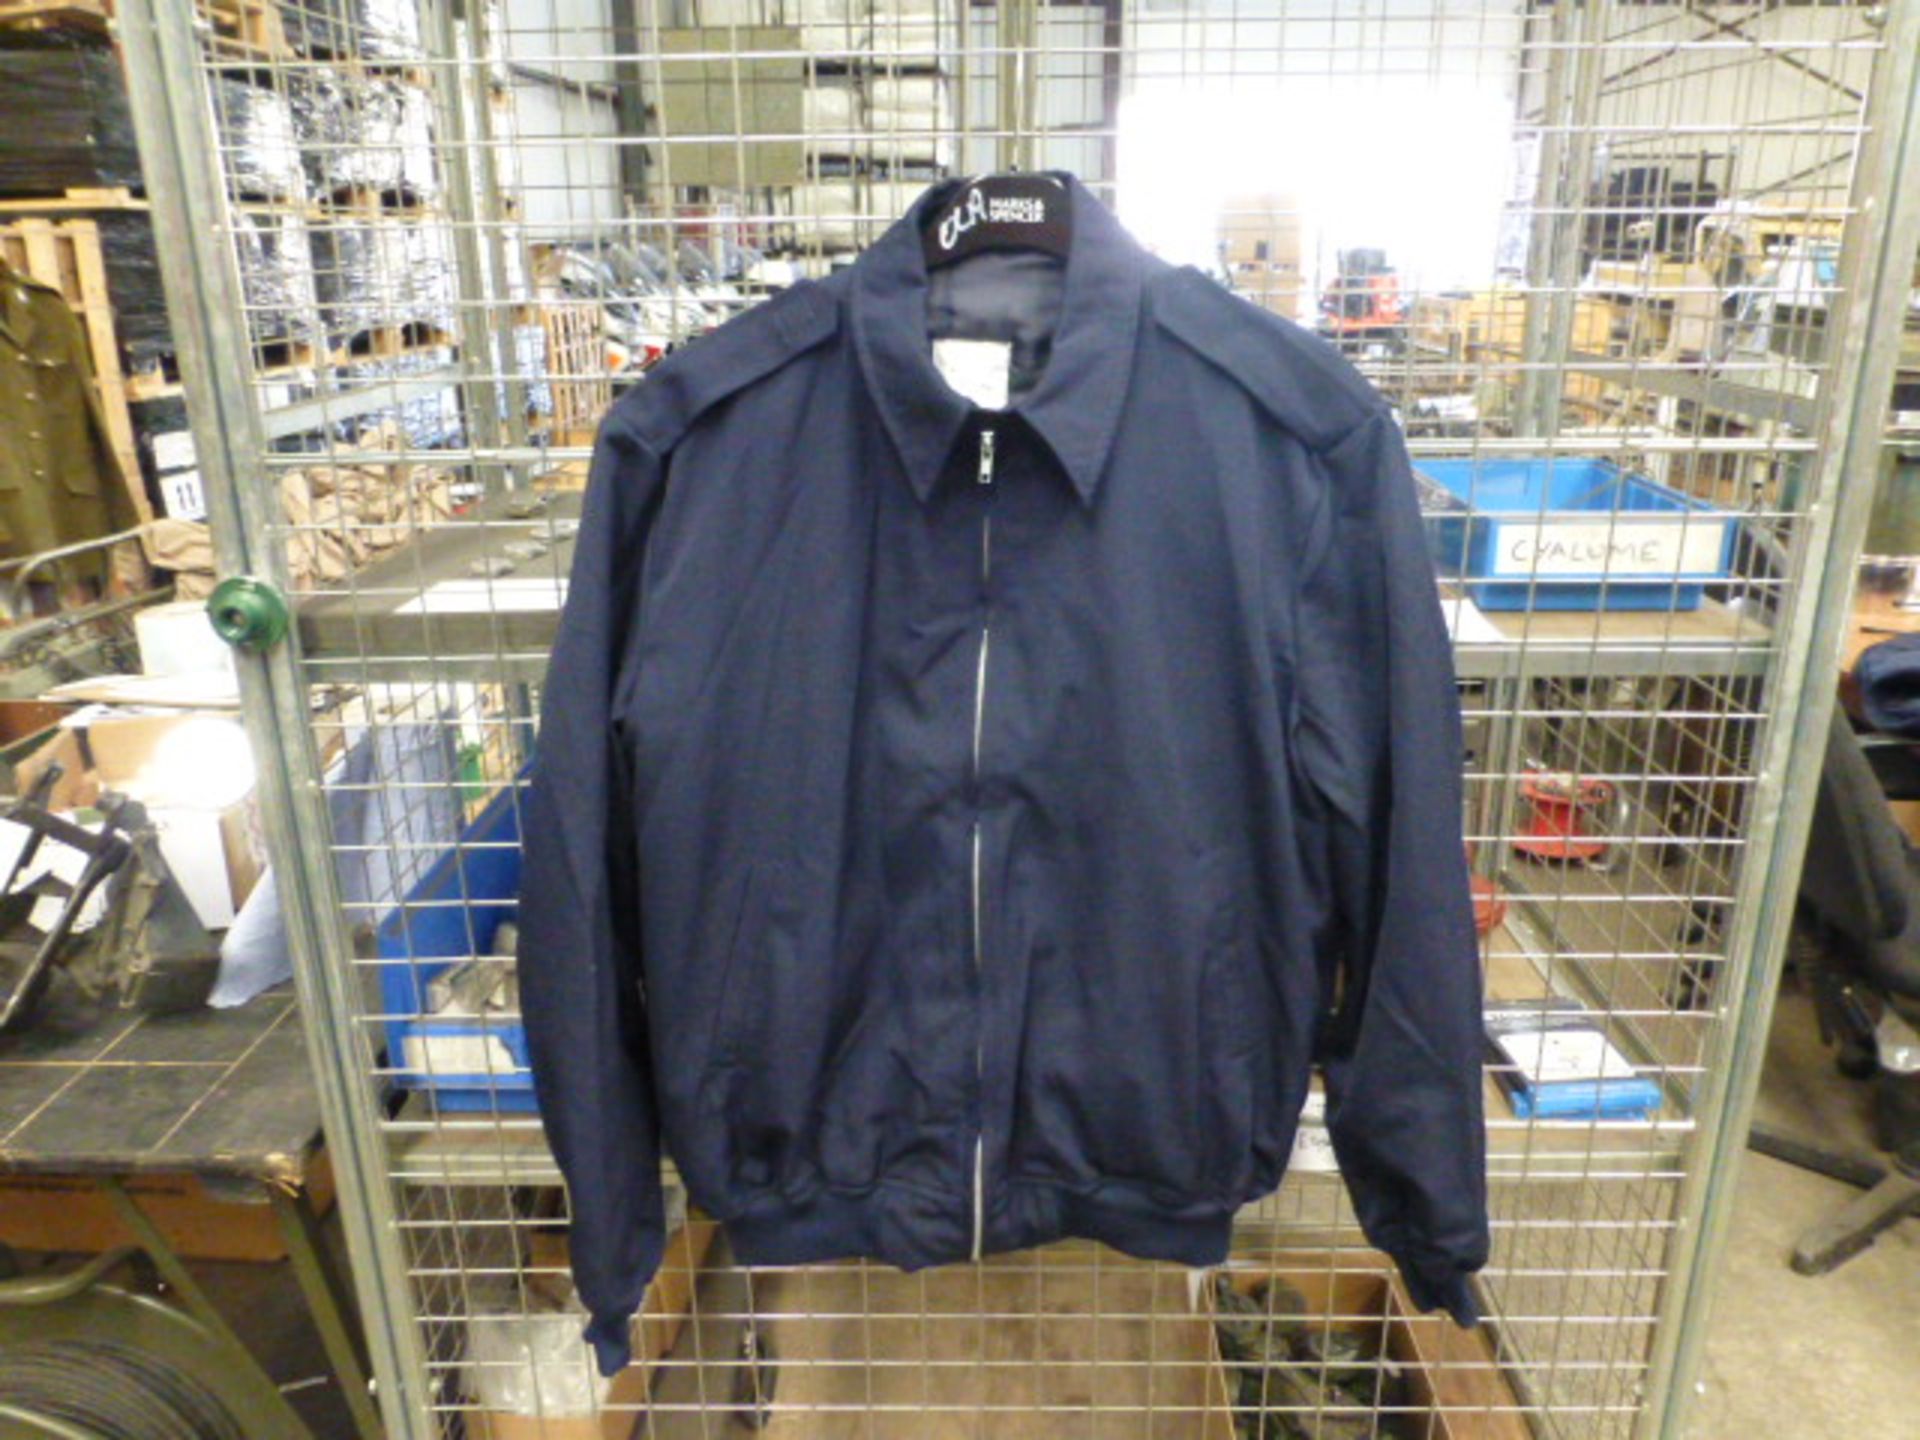 4 x RAF Bomber Jacket with Removable Liner